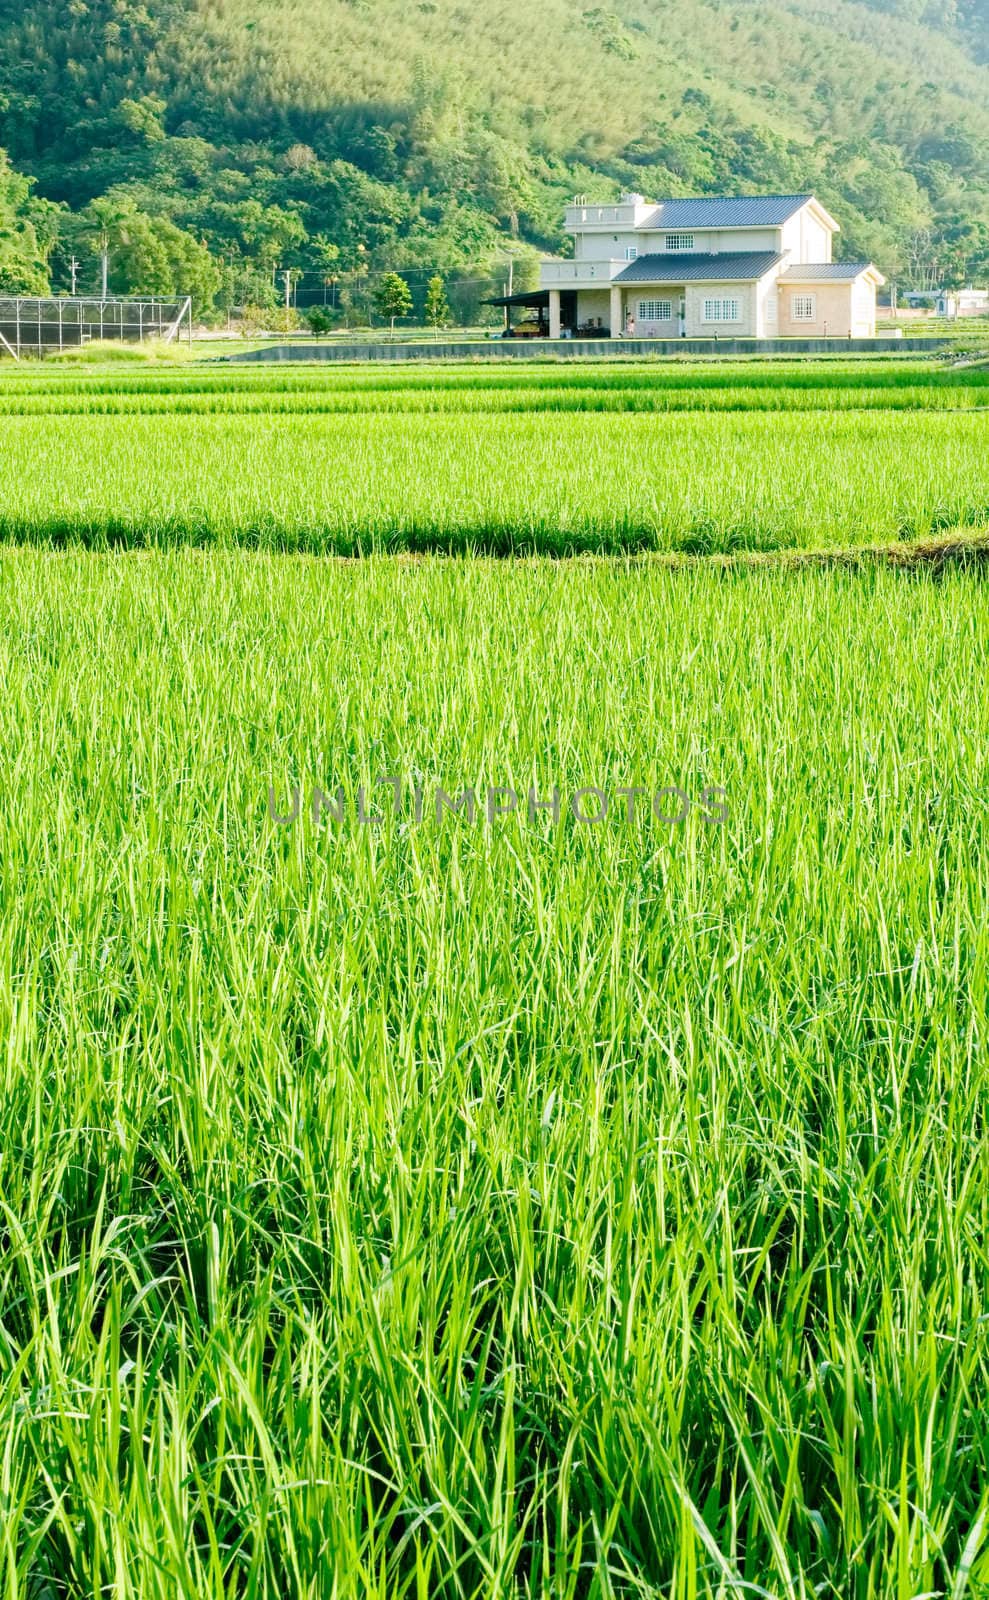 It is a landscape of green farm and small village.